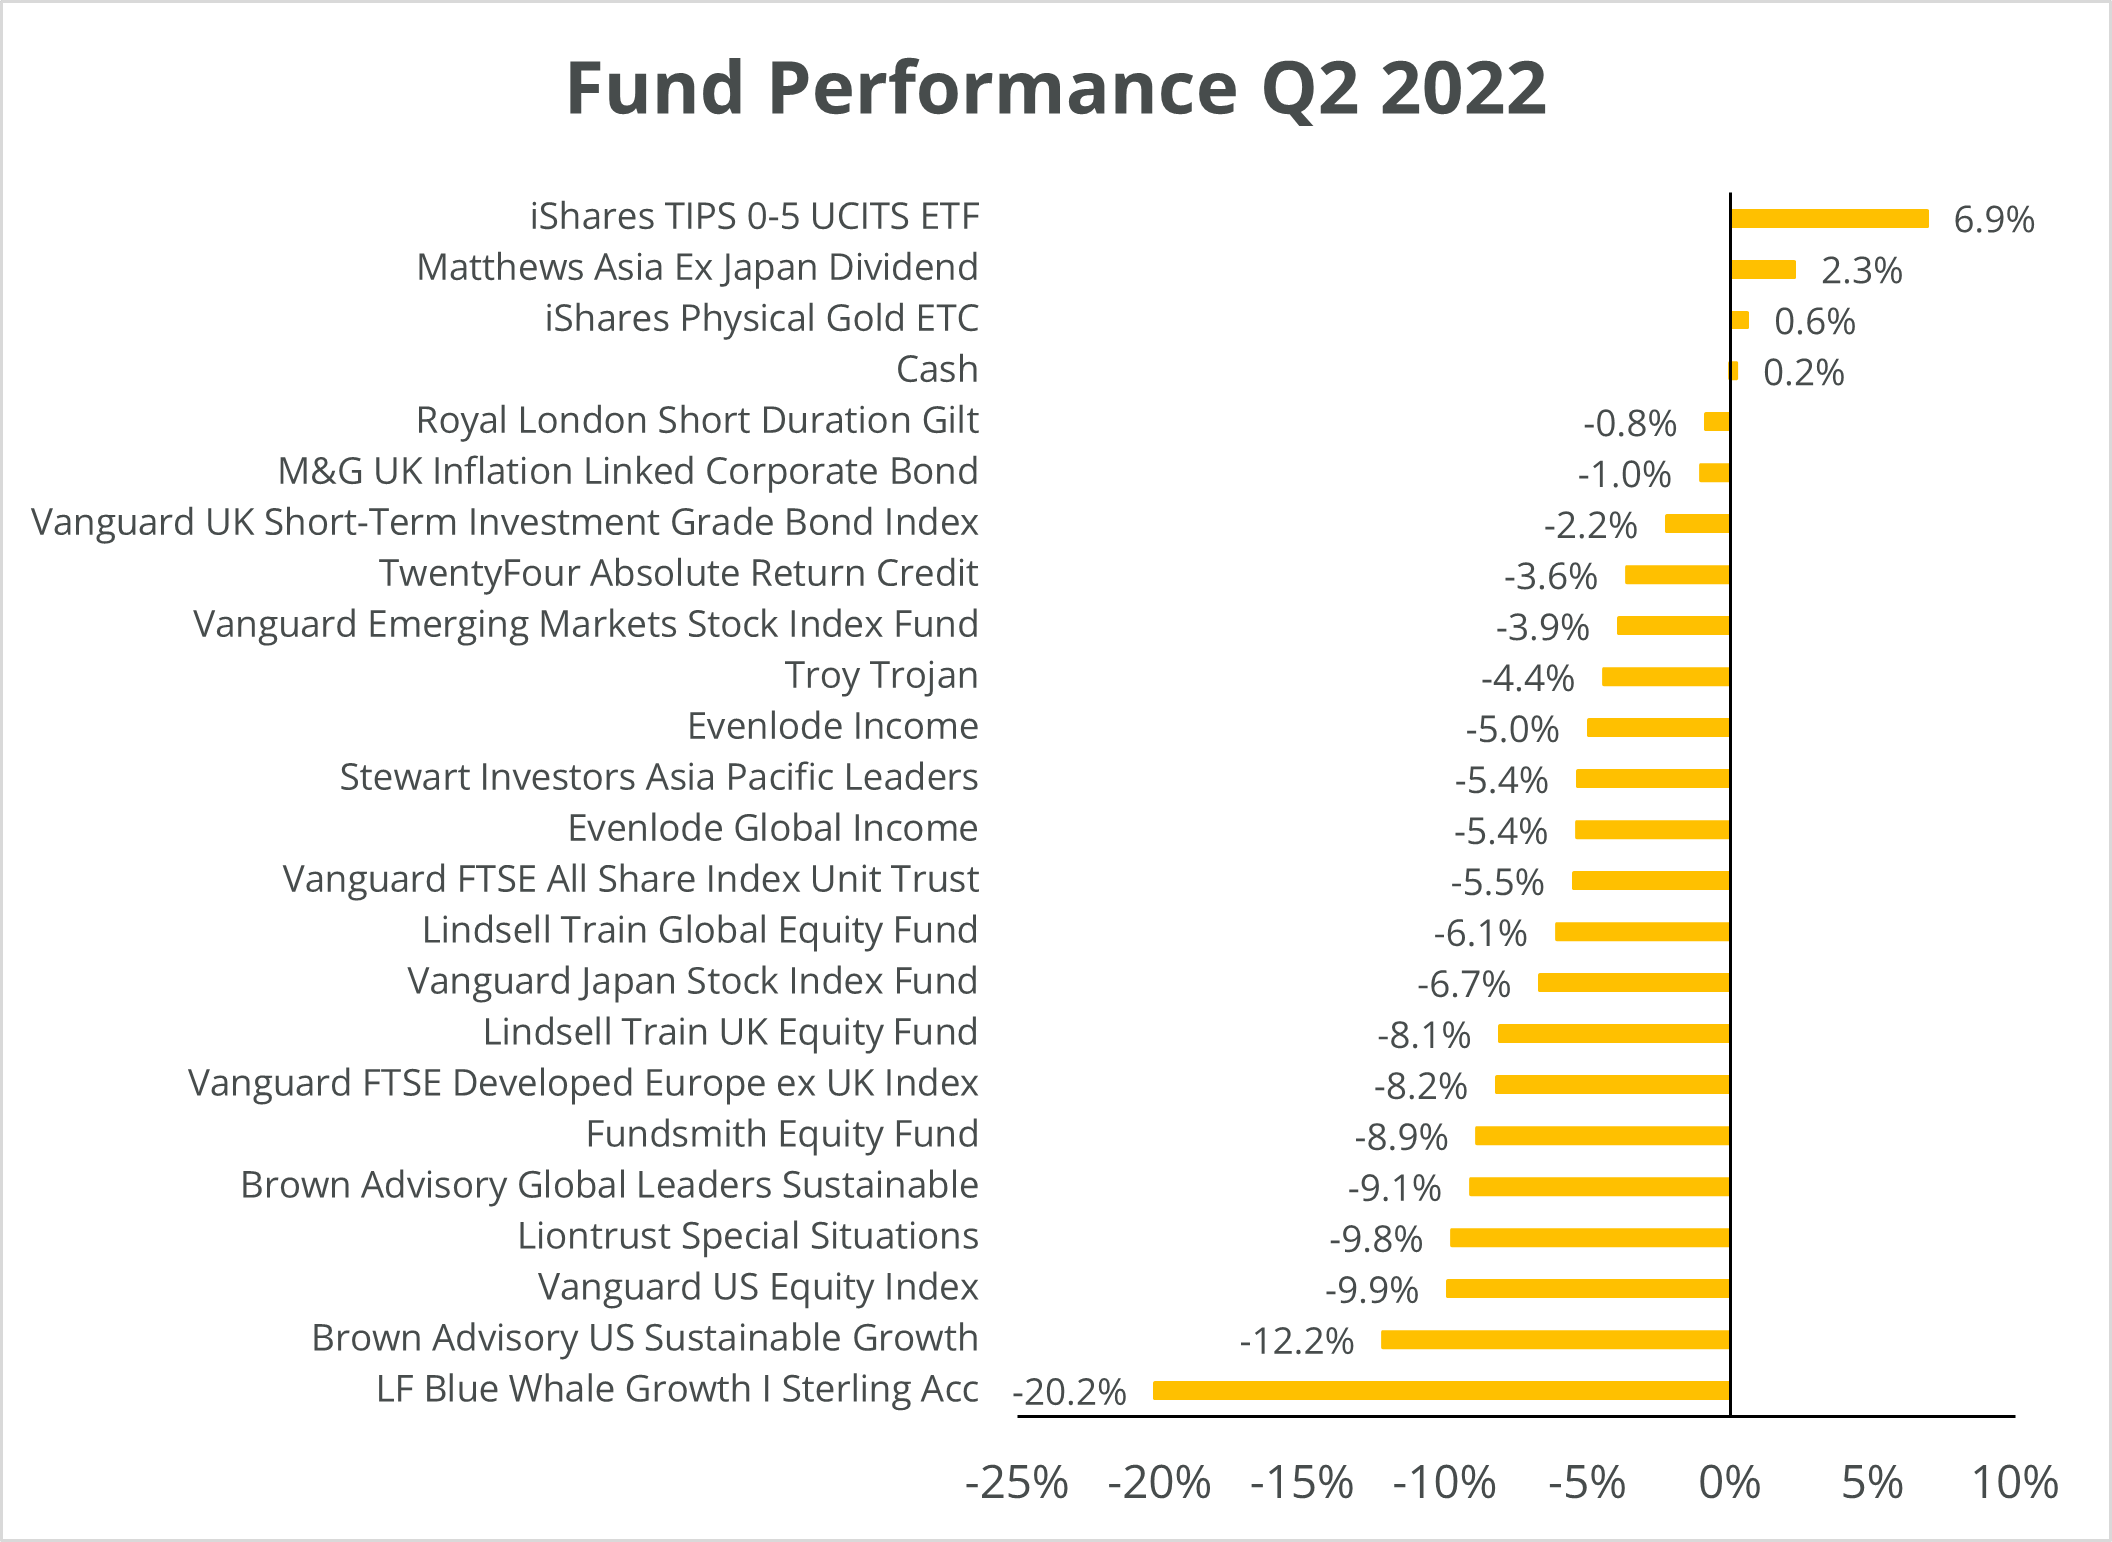 Chart of fund performance year to date as of June 2022